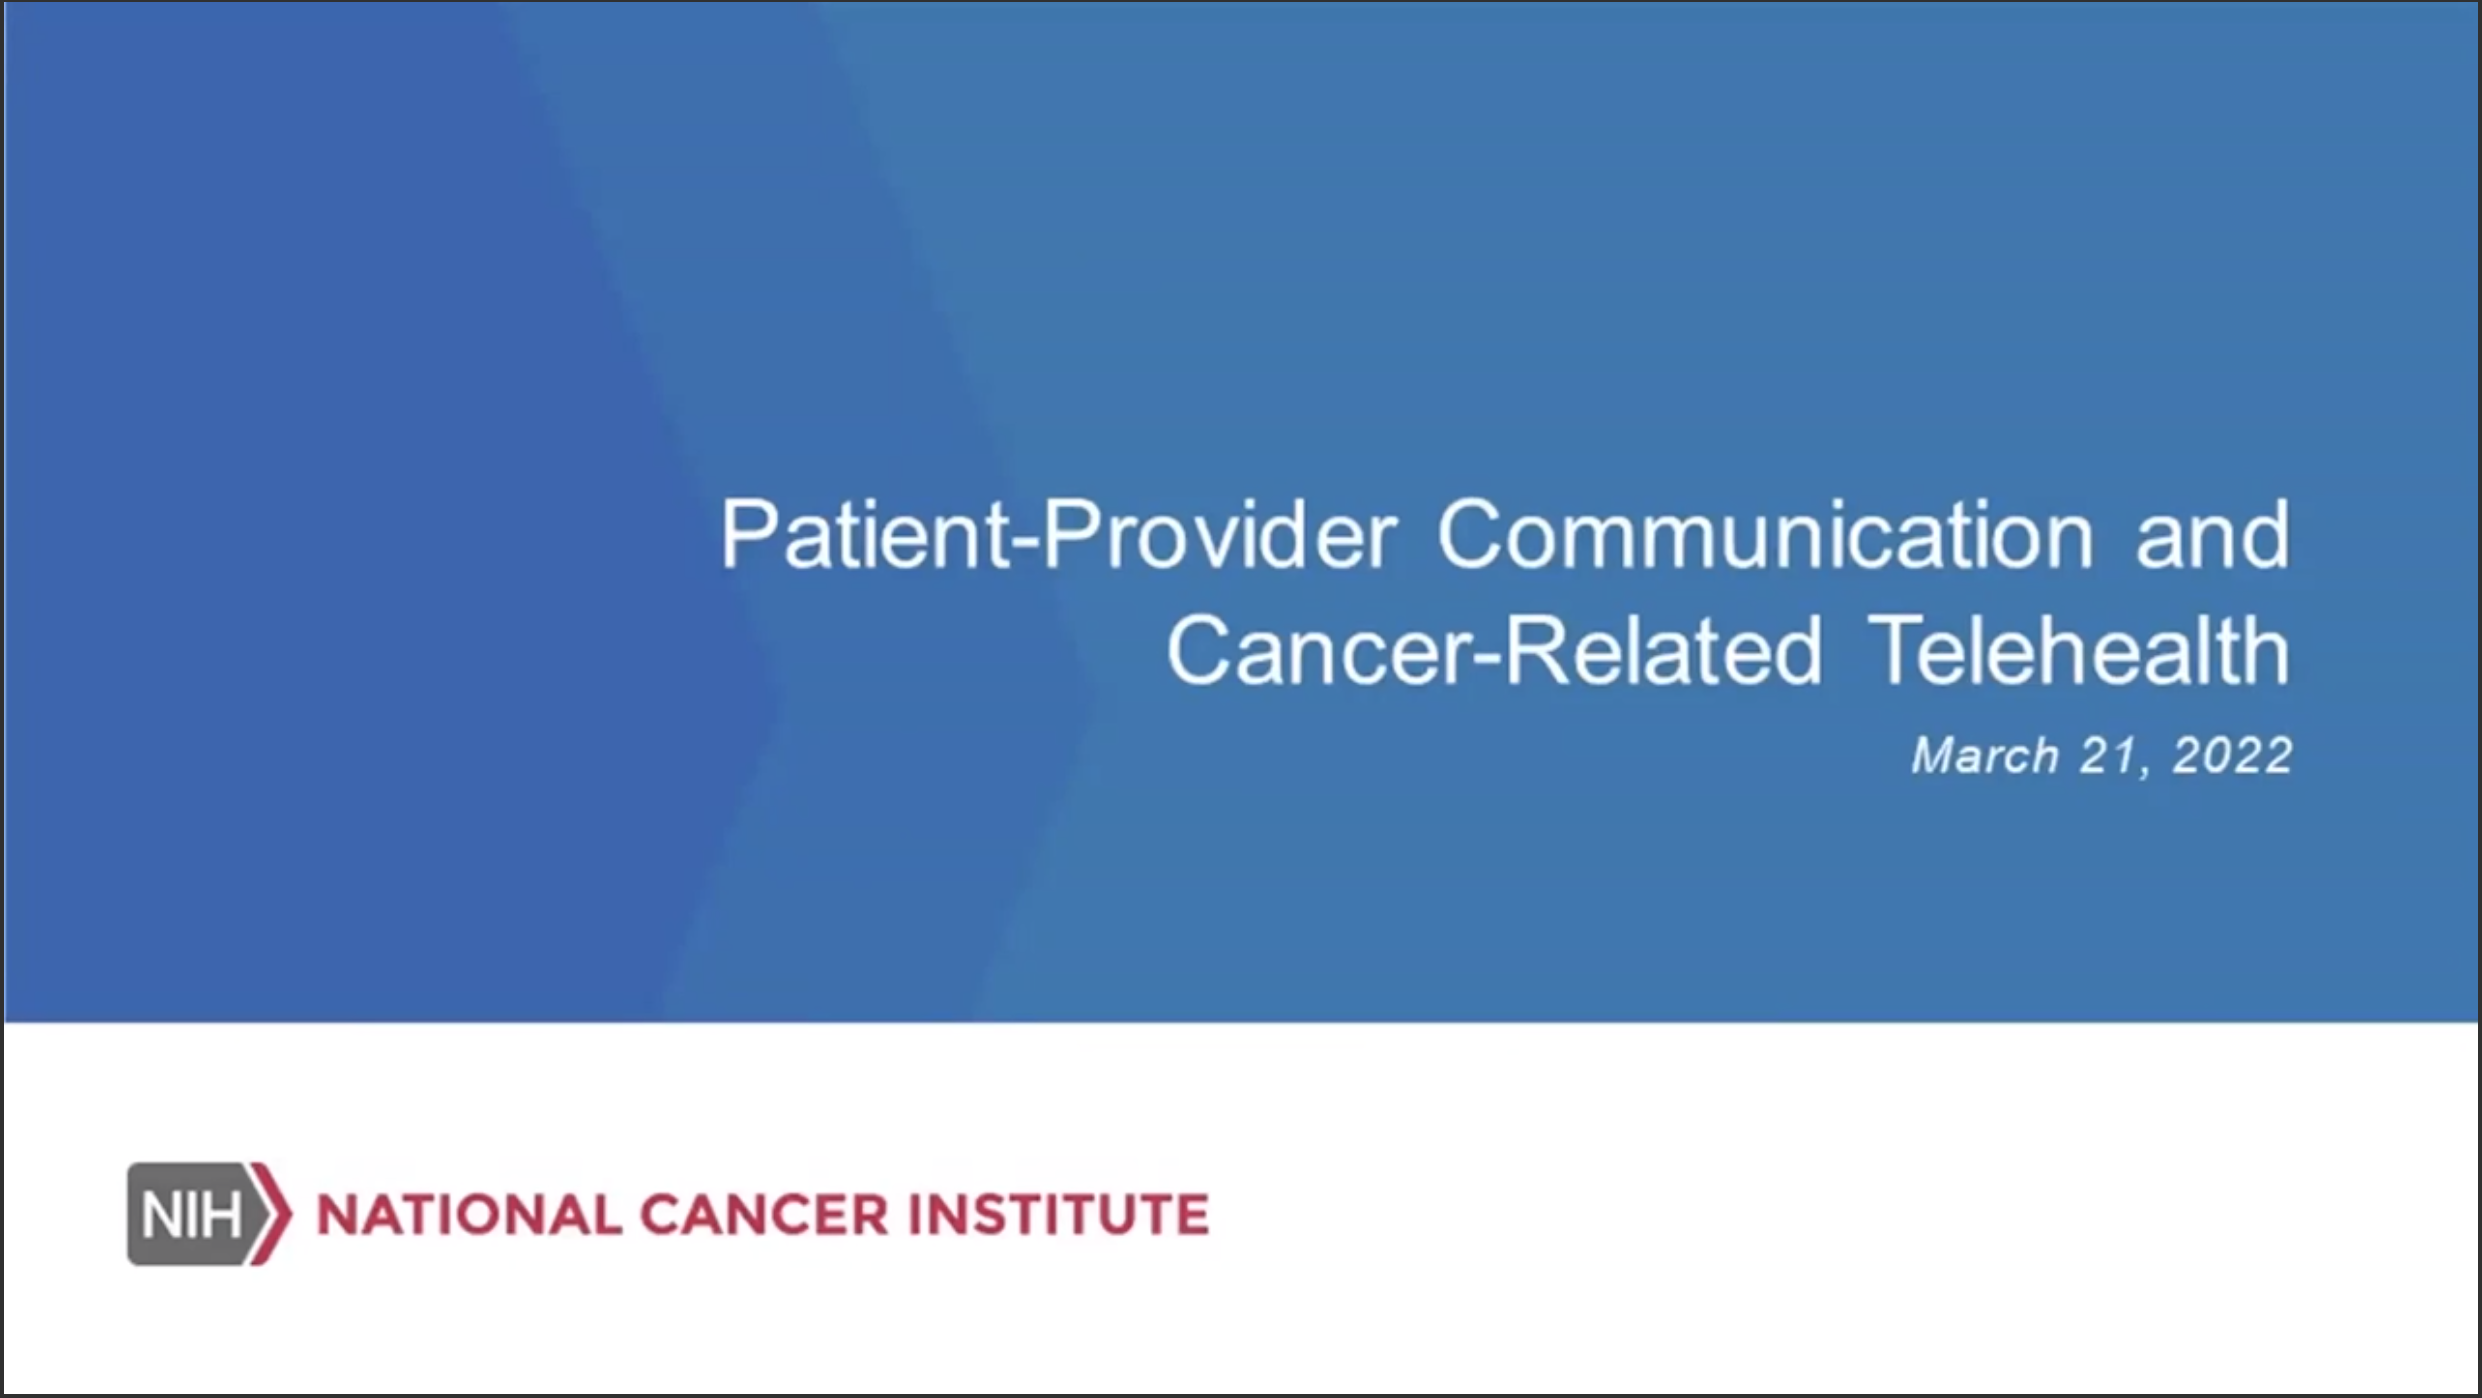 NCI Patient-provider communication and cancer-related telehealth seminar screenshot.